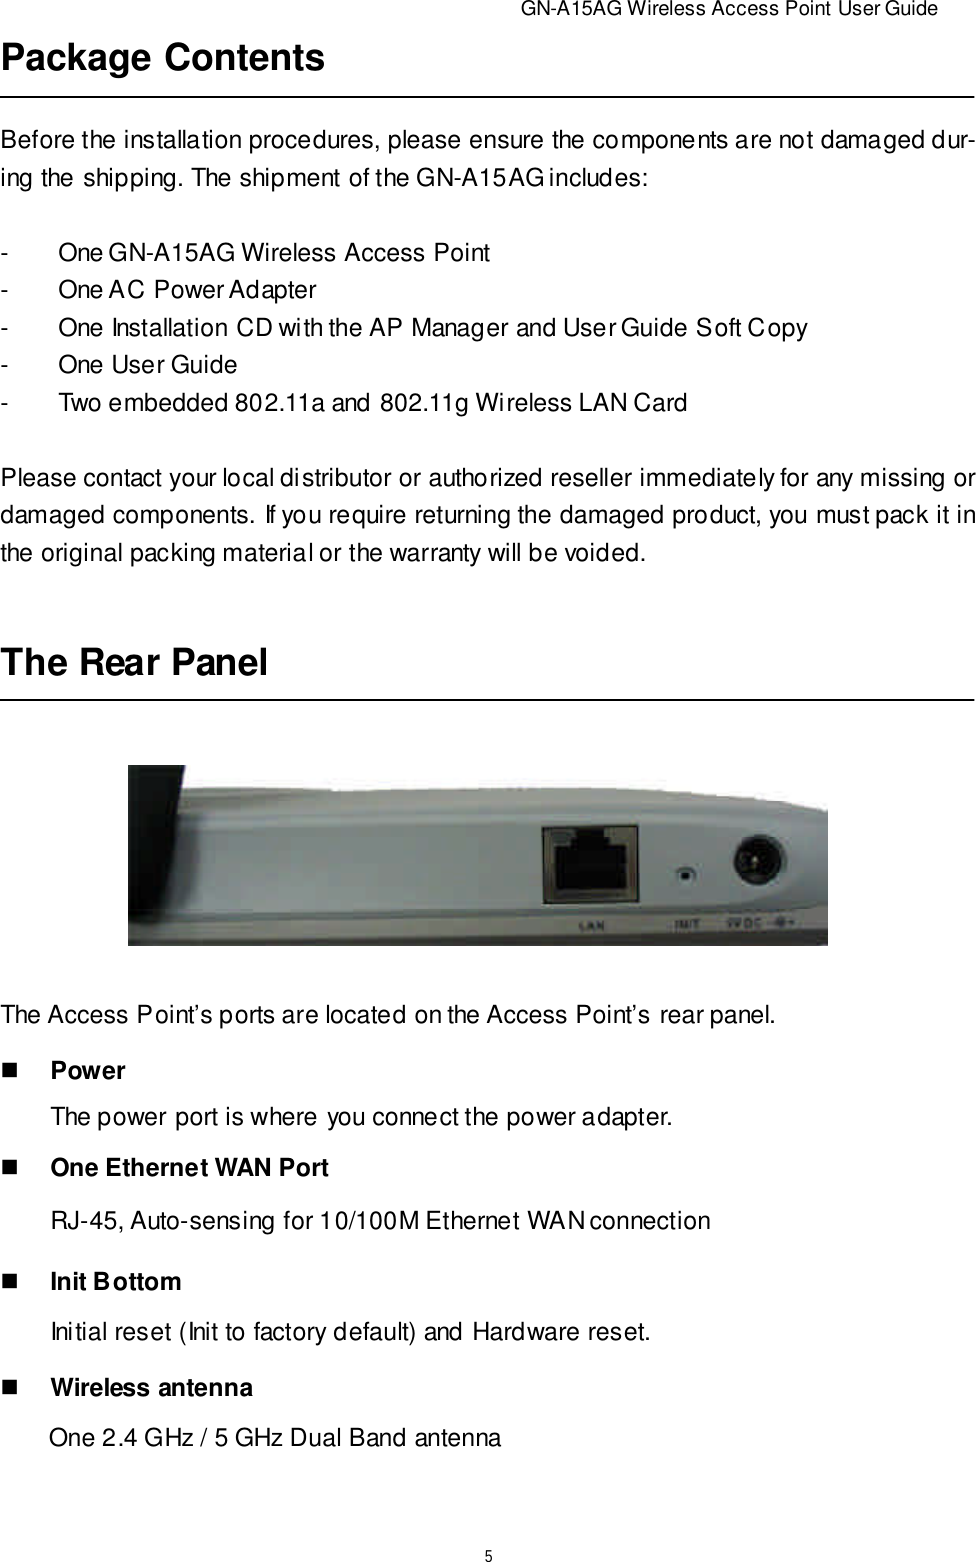                          GN-A15AG Wireless Access Point User Guide5The Rear PanelThe Access Point’s ports are located on the Access Point’s rear panel.RJ-45, Auto-sensing for 10/100M Ethernet WAN connectionInitial reset (Init to factory default) and Hardware reset.       The power port is where you connect the power adapter.nOne Ethernet WAN PortnInit BottomnWireless antennaOne 2.4 GHz / 5 GHz Dual Band antennanPowerPackage ContentsBefore the installation procedures, please ensure the components are not damaged dur-ing the shipping. The shipment of the GN-A15AG includes:-One GN-A15AG Wireless Access Point-One AC Power Adapter-One Installation CD with the AP Manager and User Guide Soft Copy-One User Guide-Two embedded 802.11a and 802.11g Wireless LAN CardPlease contact your local distributor or authorized reseller immediately for any missing ordamaged components. If you require returning the damaged product, you must pack it inthe original packing material or the warranty will be voided.